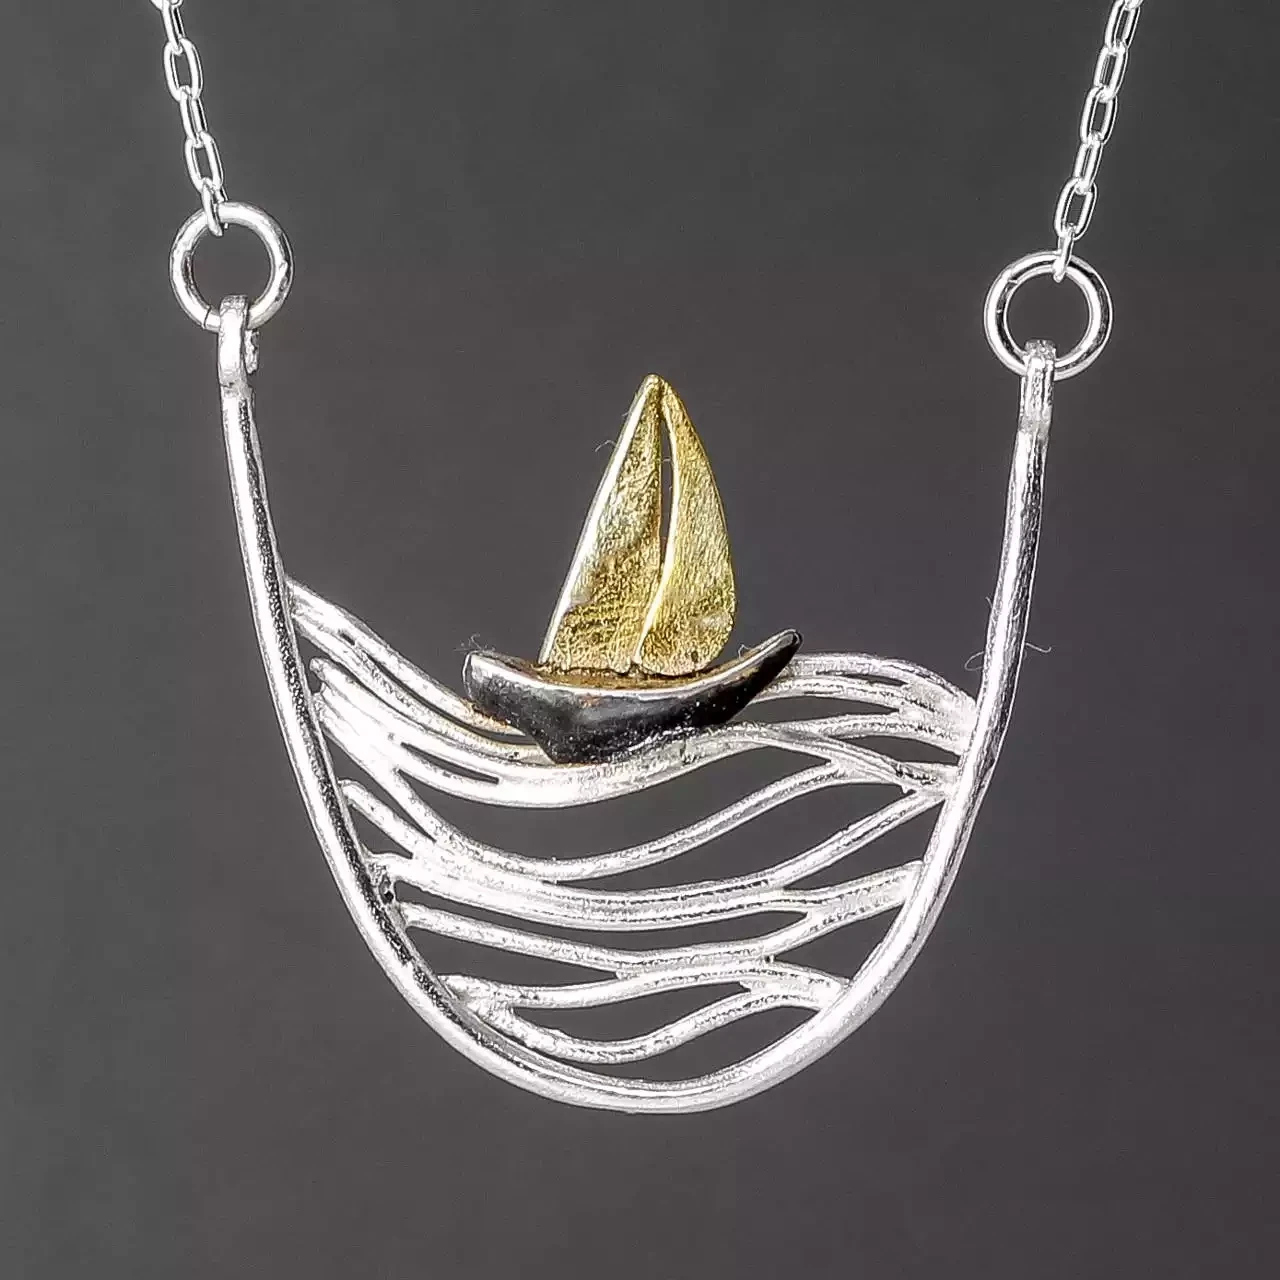 Sailing by Silver and Gold Plated Necklace by Xuella Arnold